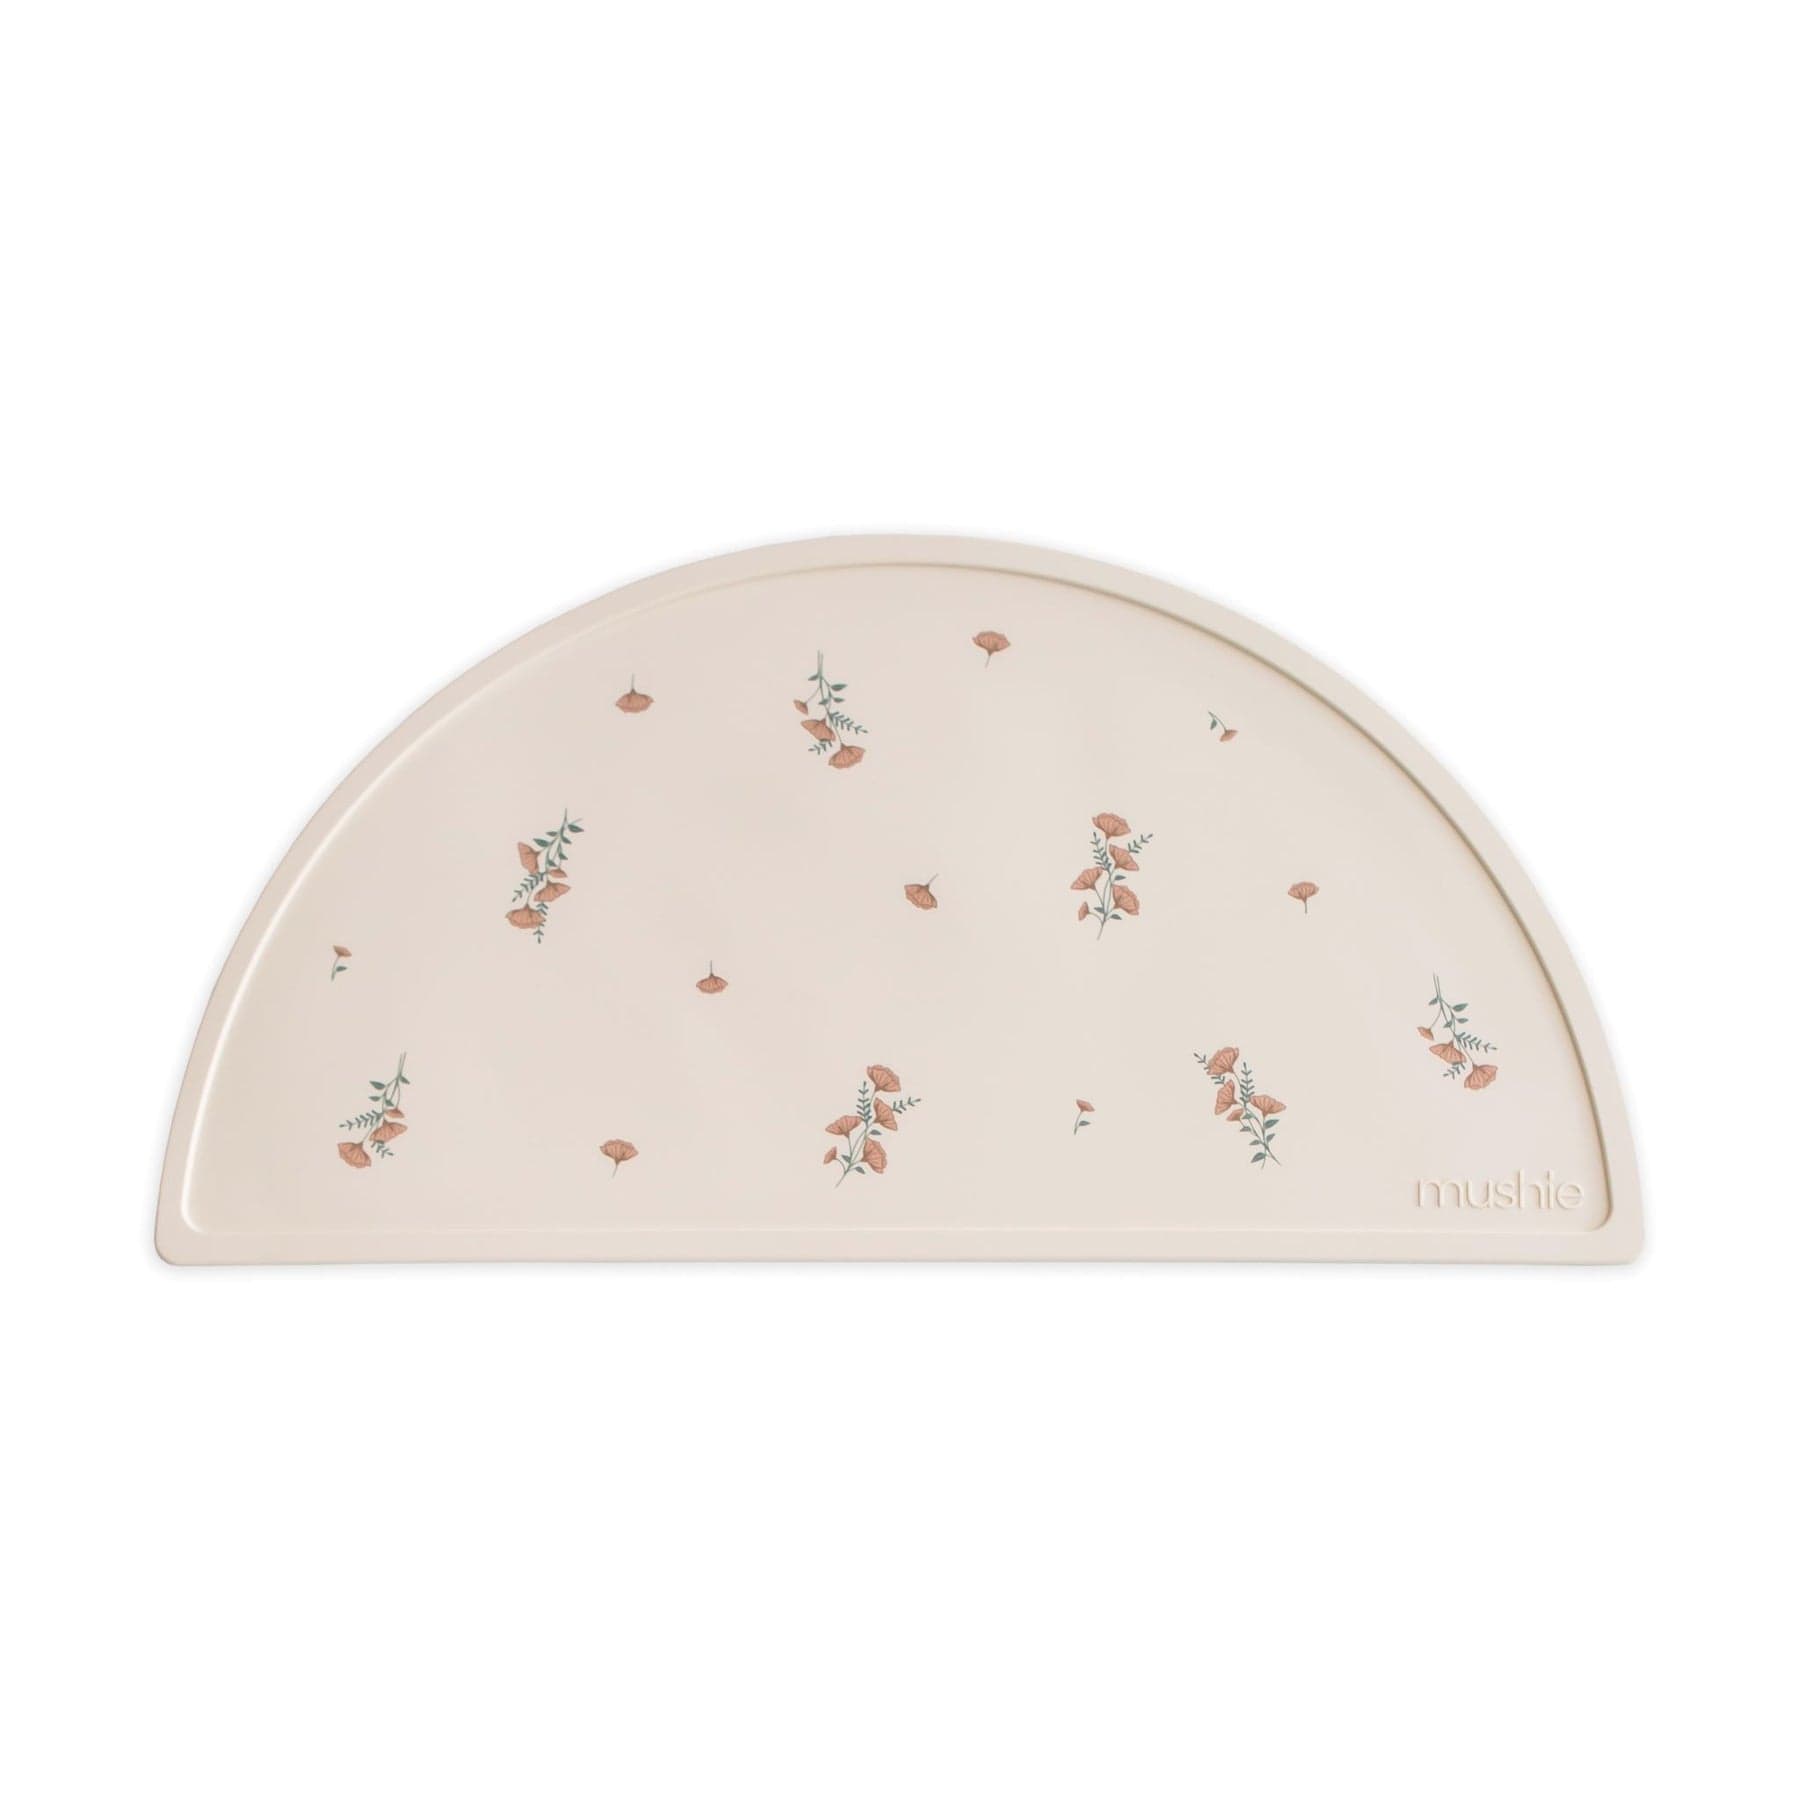 Mushie Baby Accessory Pink Flowers Mushie Silicone Placemats